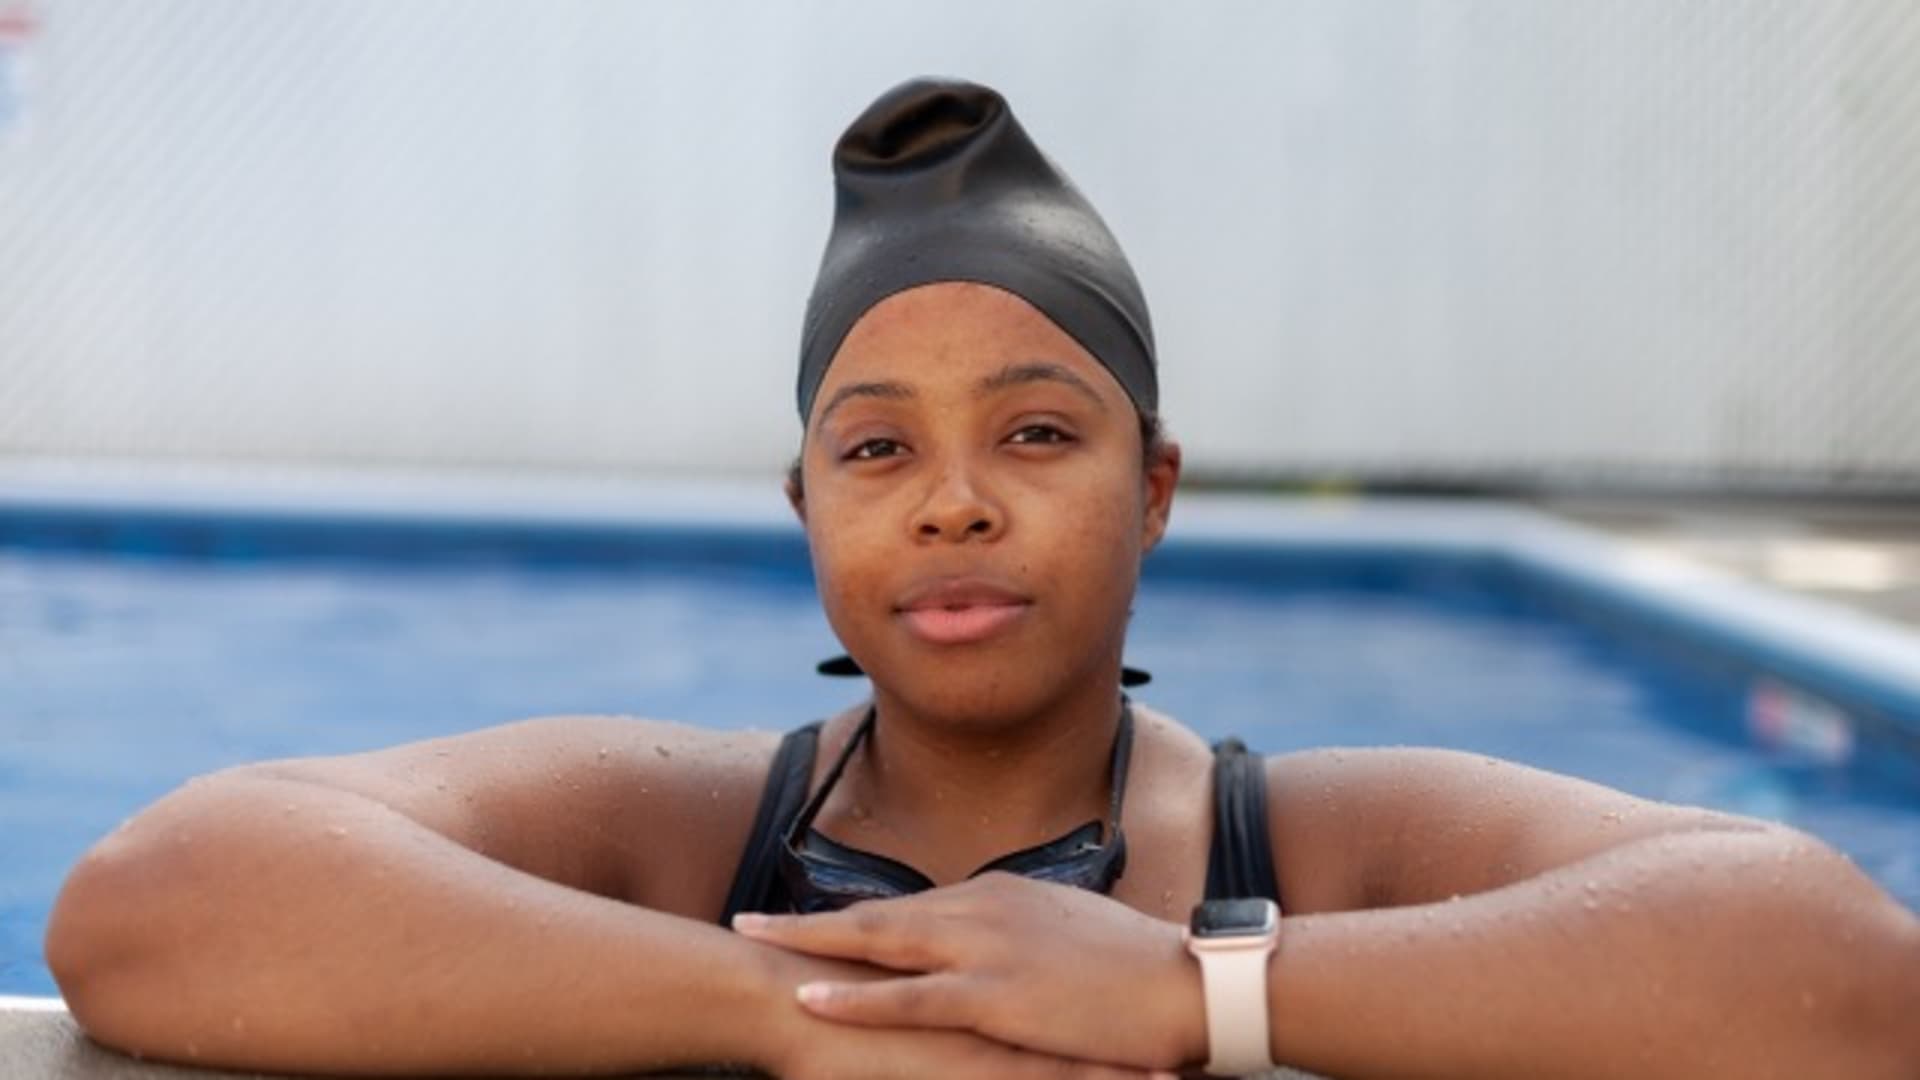 While attending CUNY York College in Queens, New York, where she studied journalism, Paulana Lamonier joined the swim team and eventually became the captain.